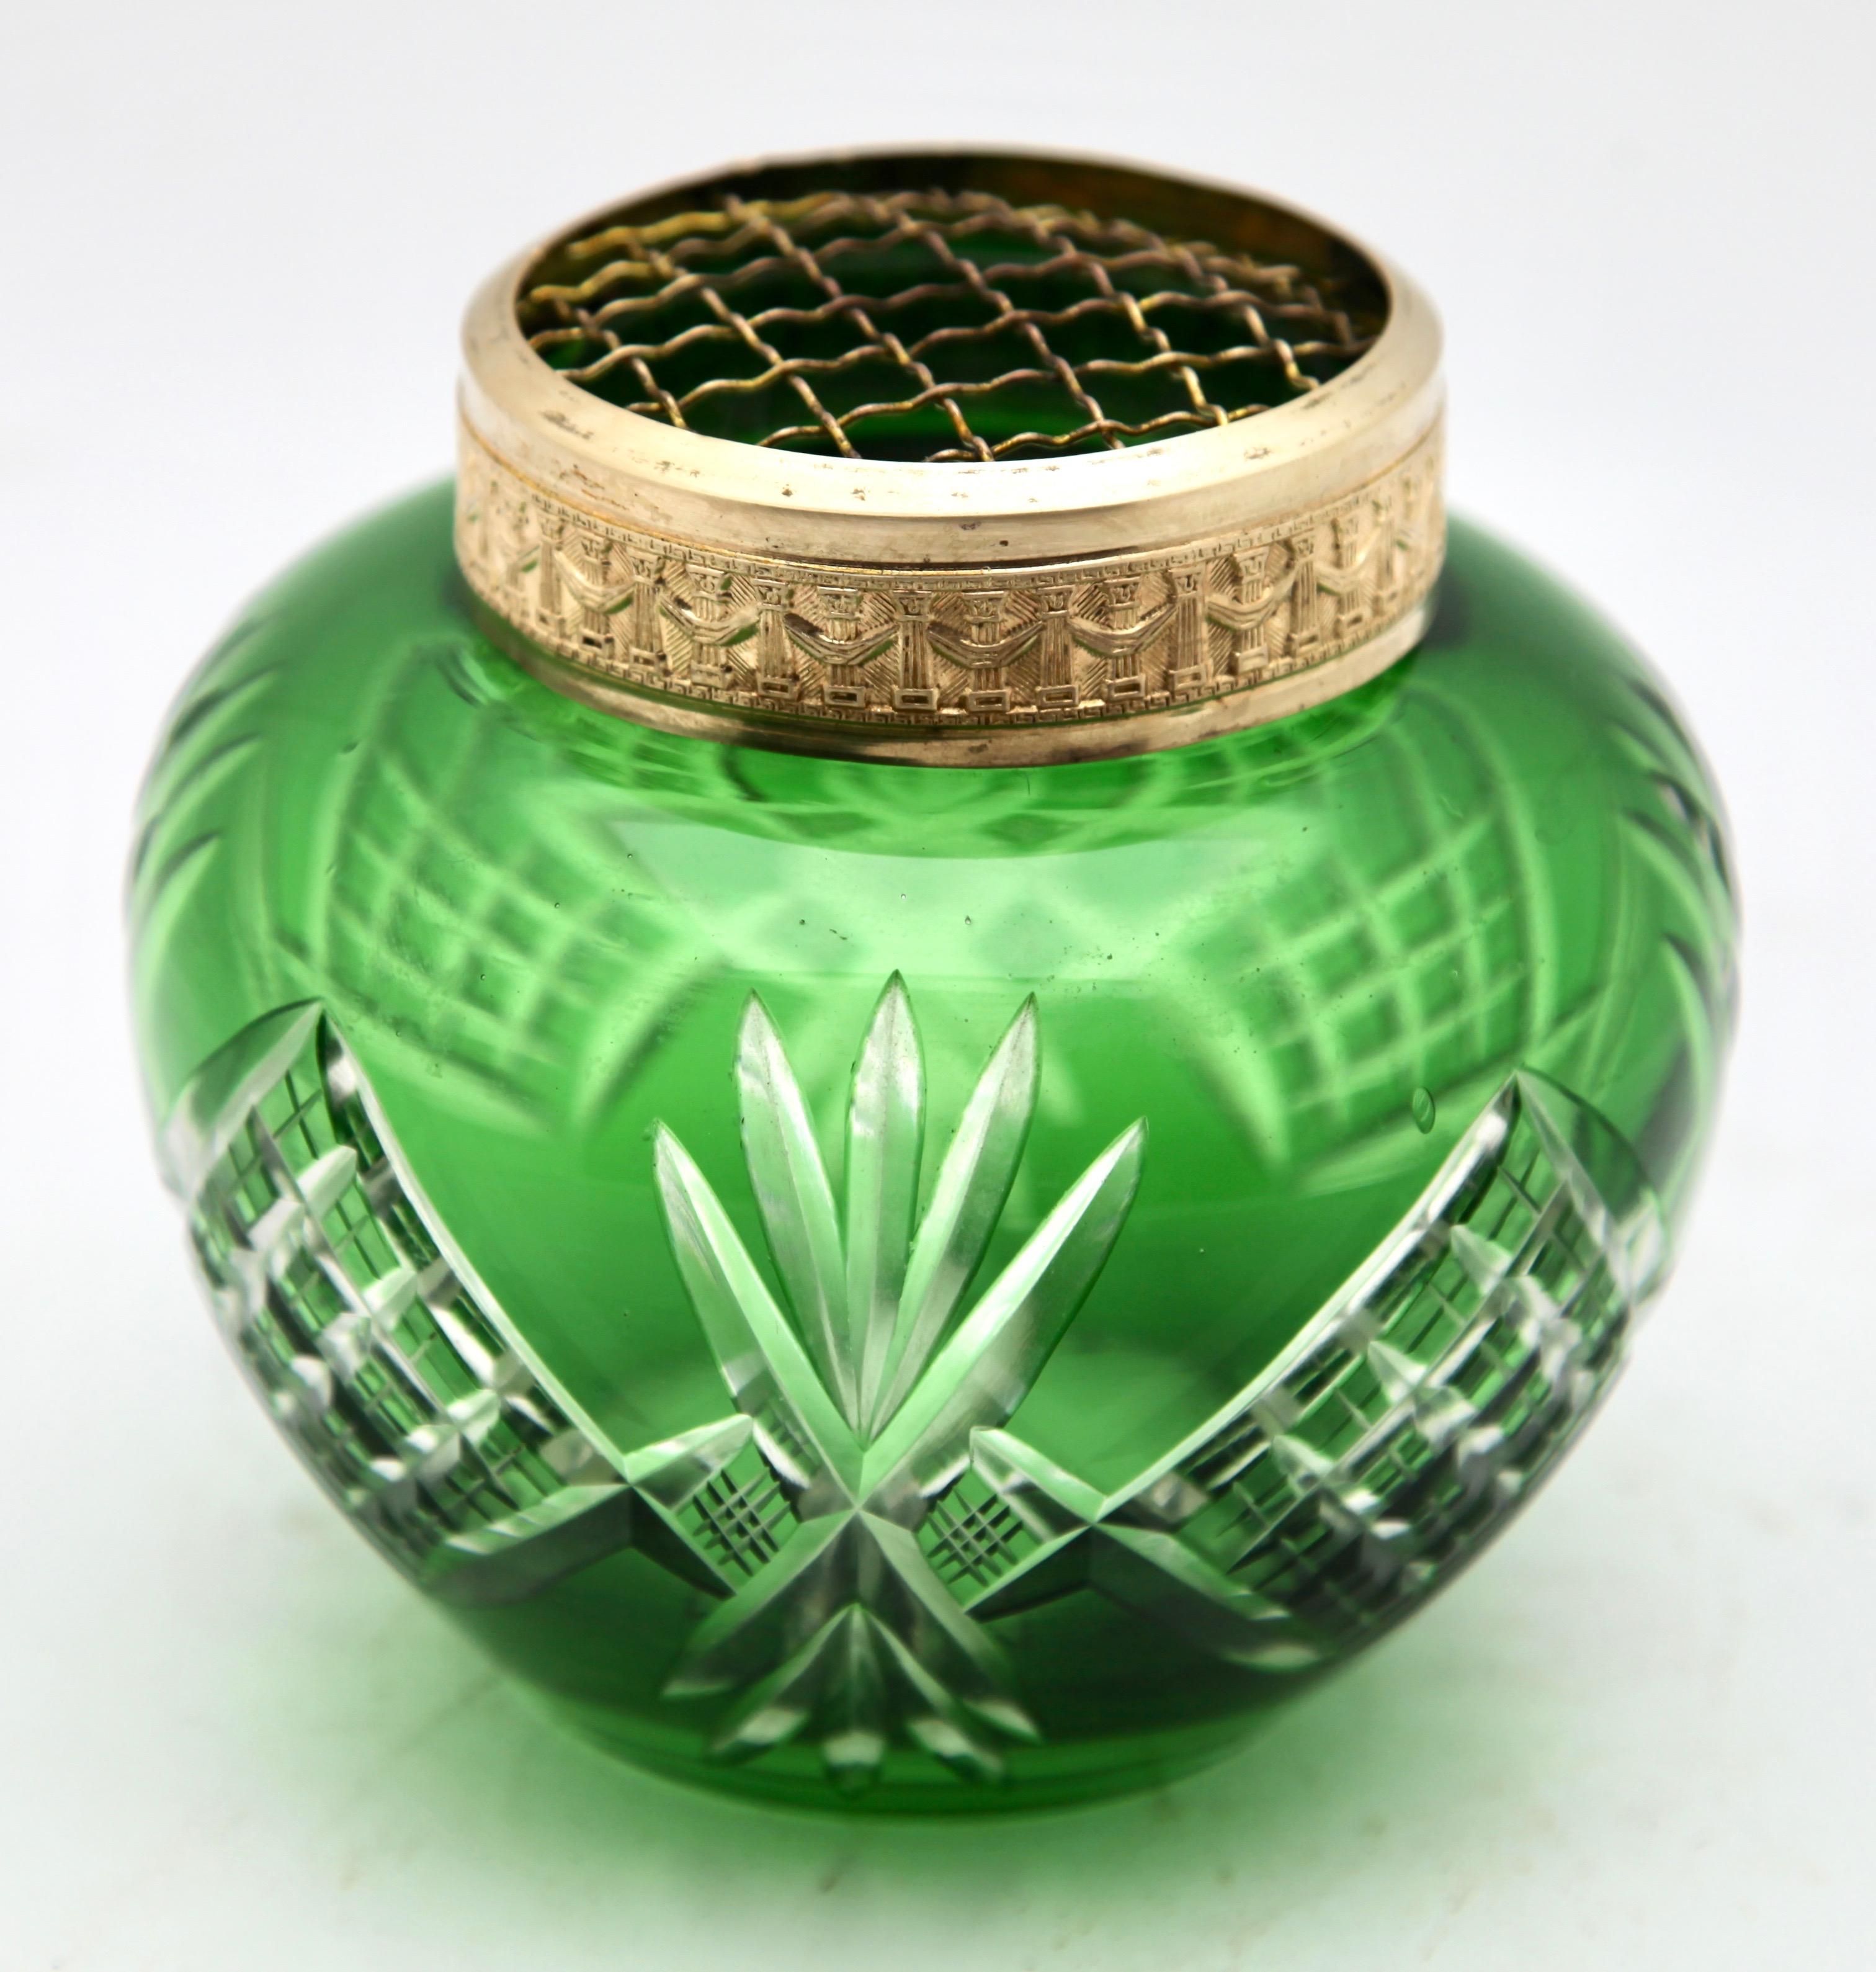 Bohemian 'Pique Fleurs' Vase, Bright Green Crystal Cut-to-Clear, with Grille For Sale 2